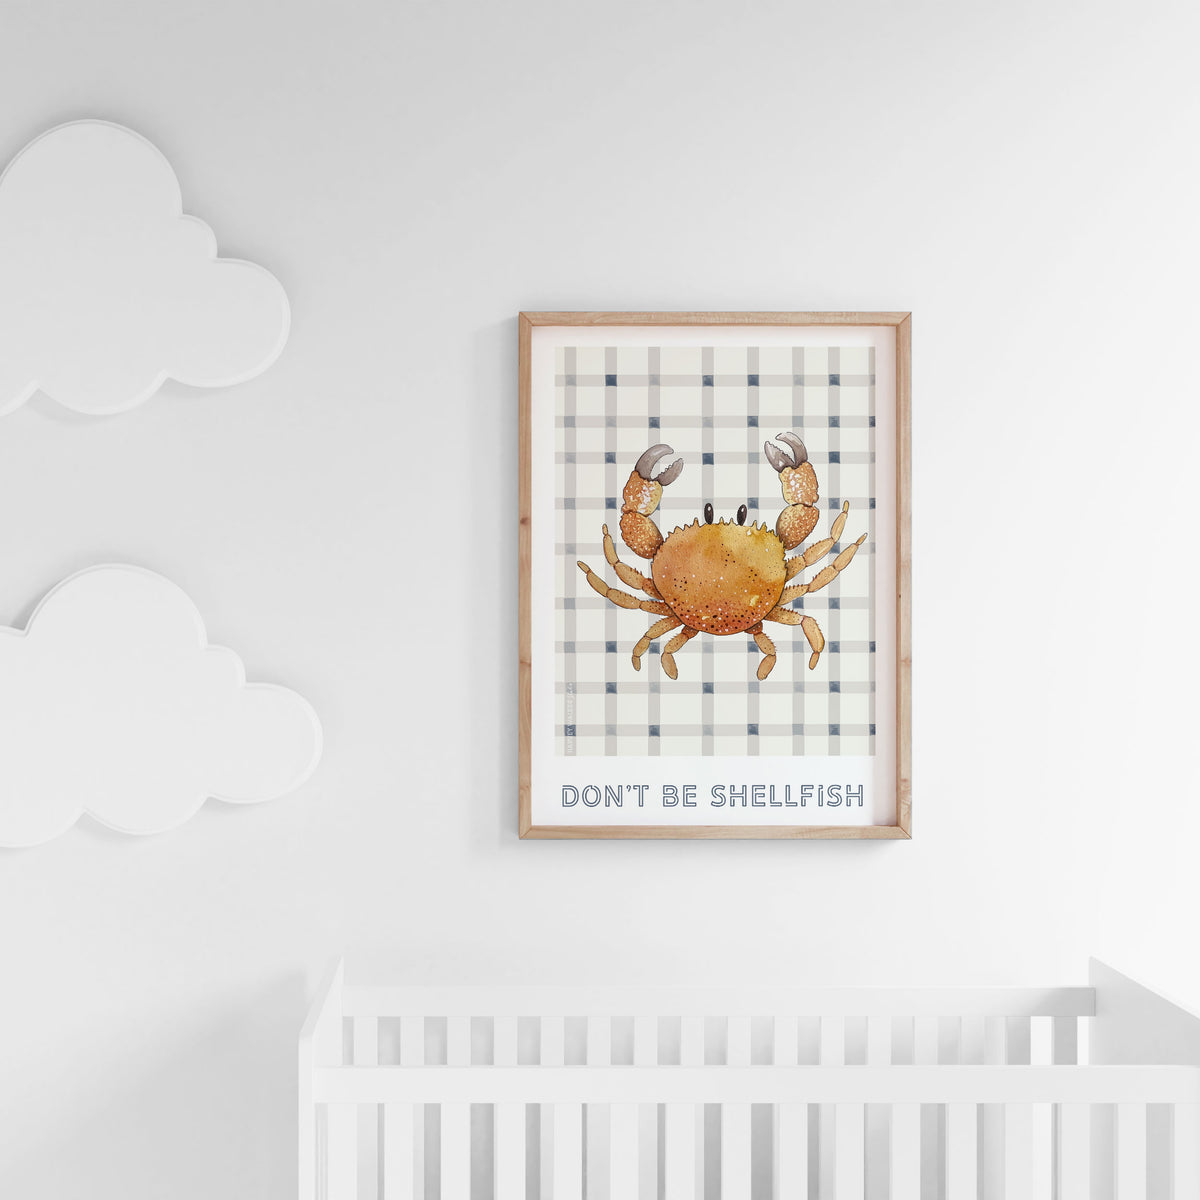 Gingham and crab watercolour print for baby&#39;s nursery, kids rooms or playrooms. Great for both girls and boys.